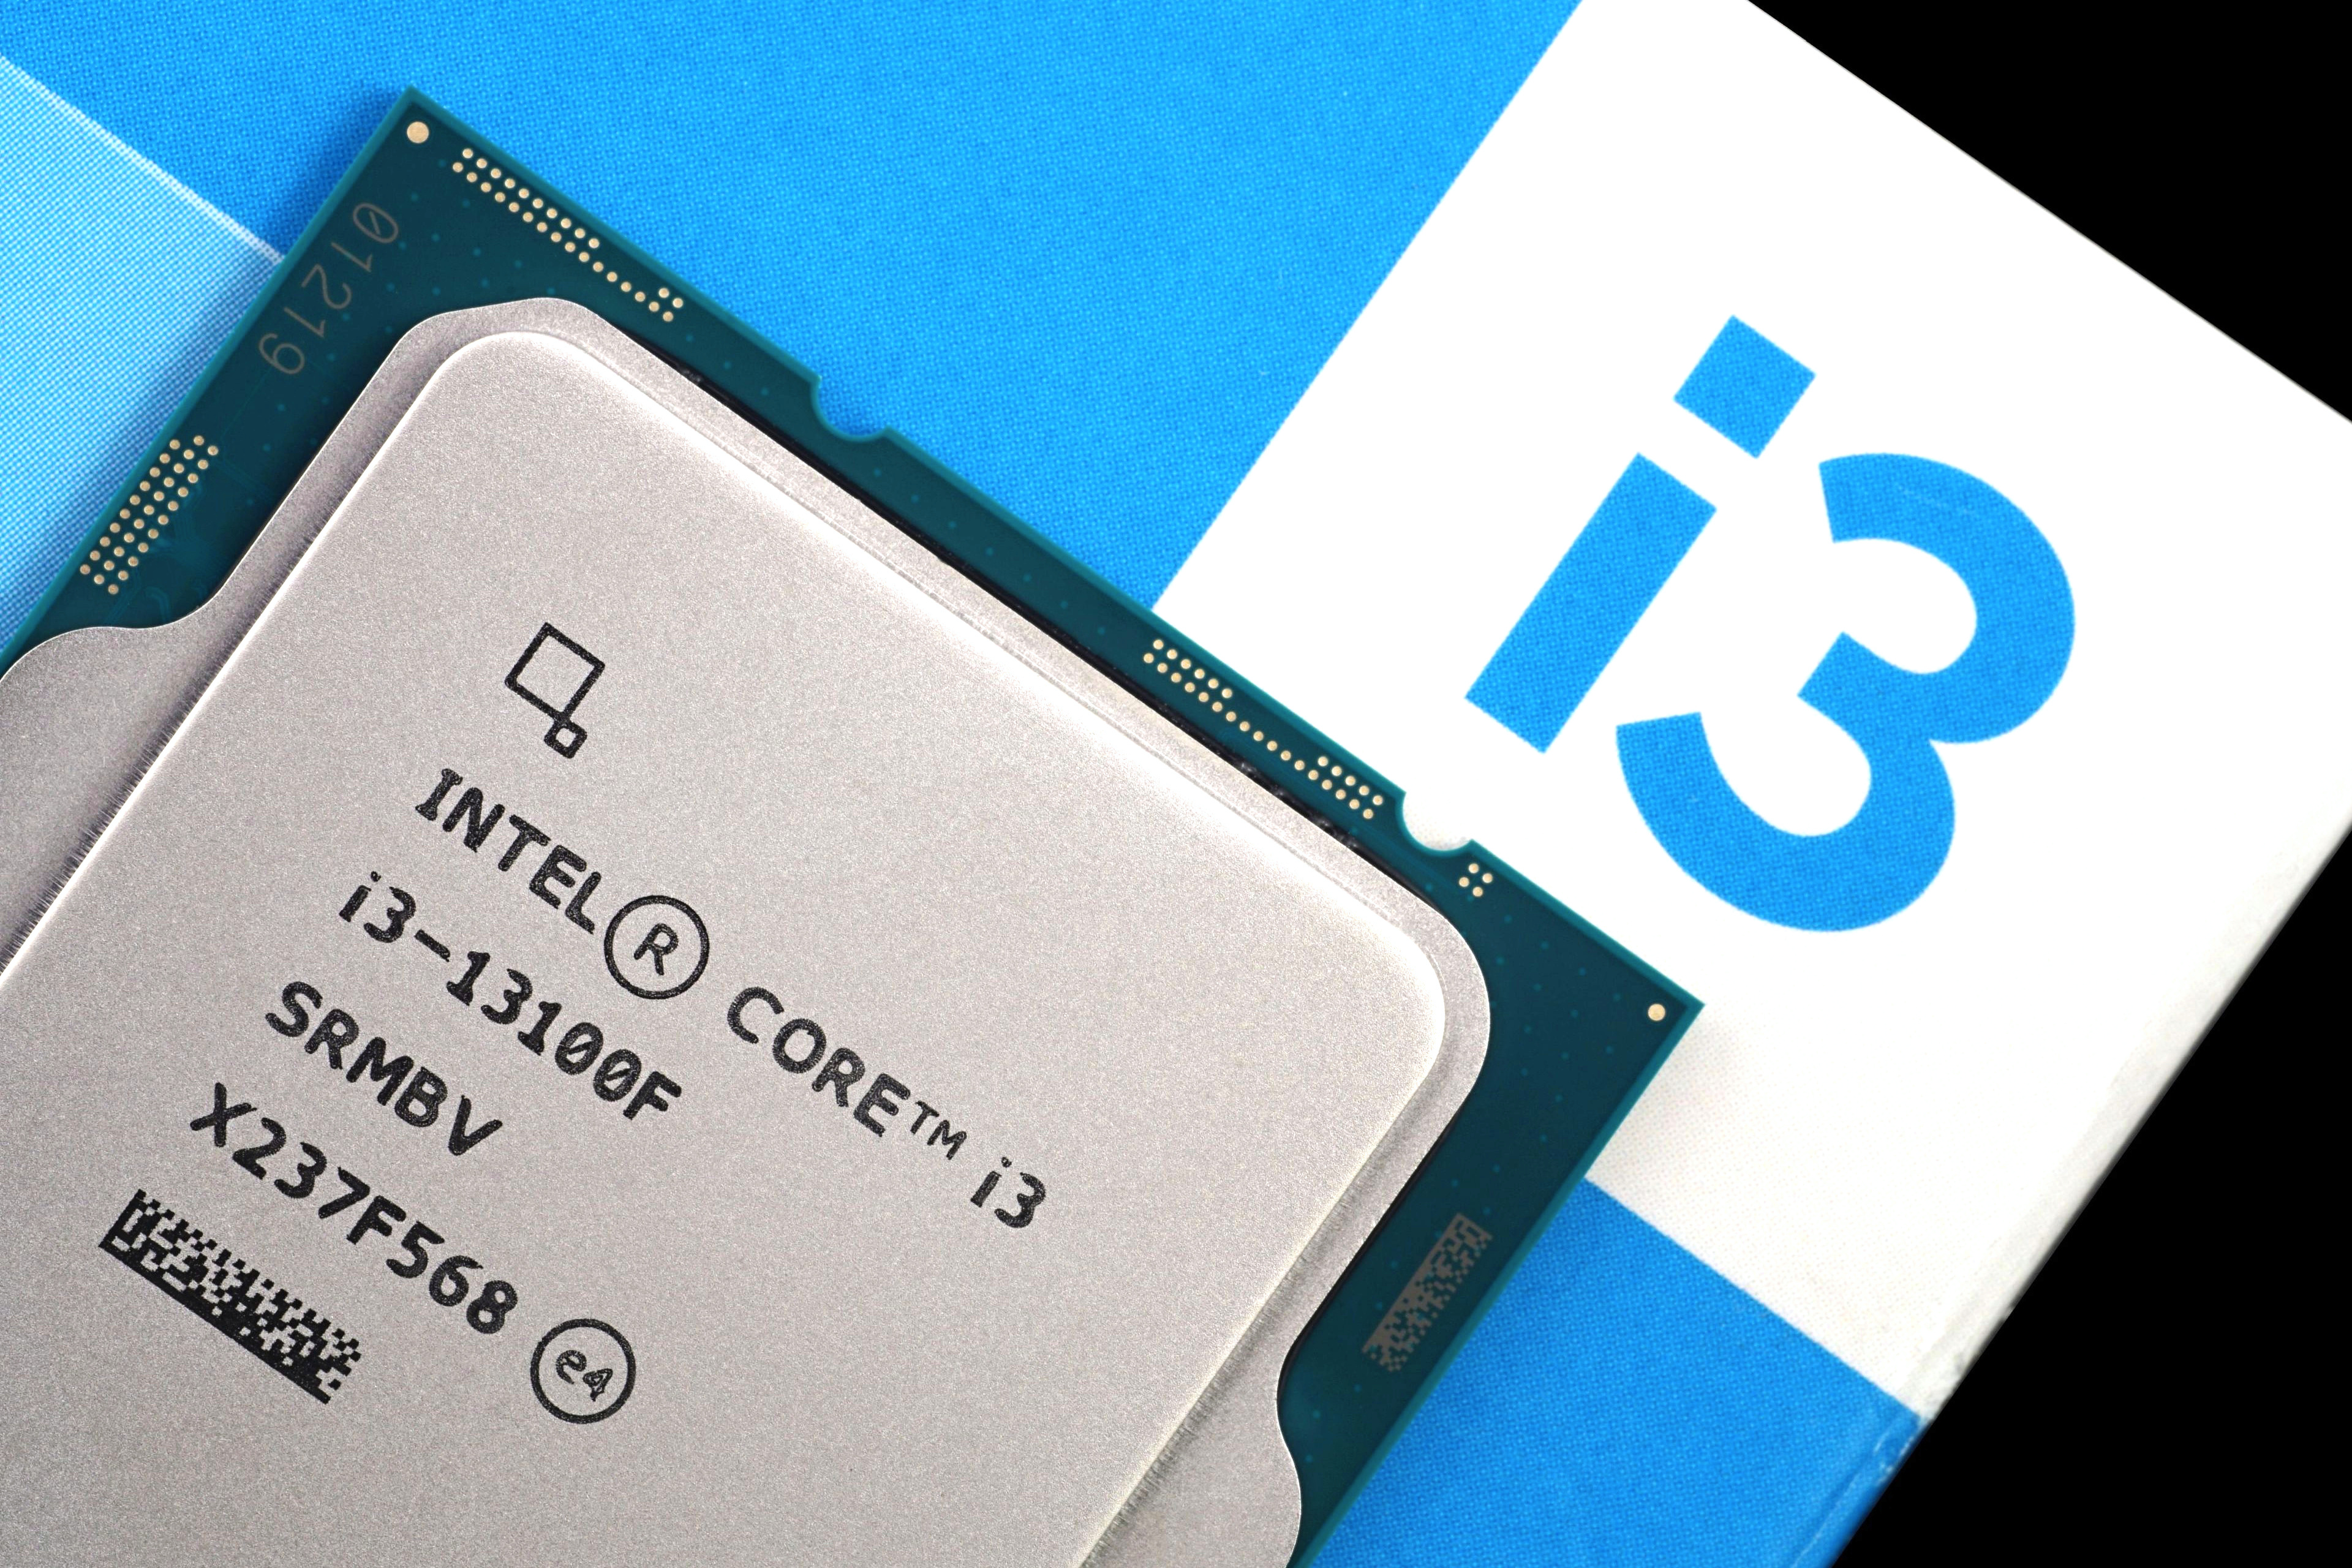 Is an Intel Core i3 good enough for PC gaming?